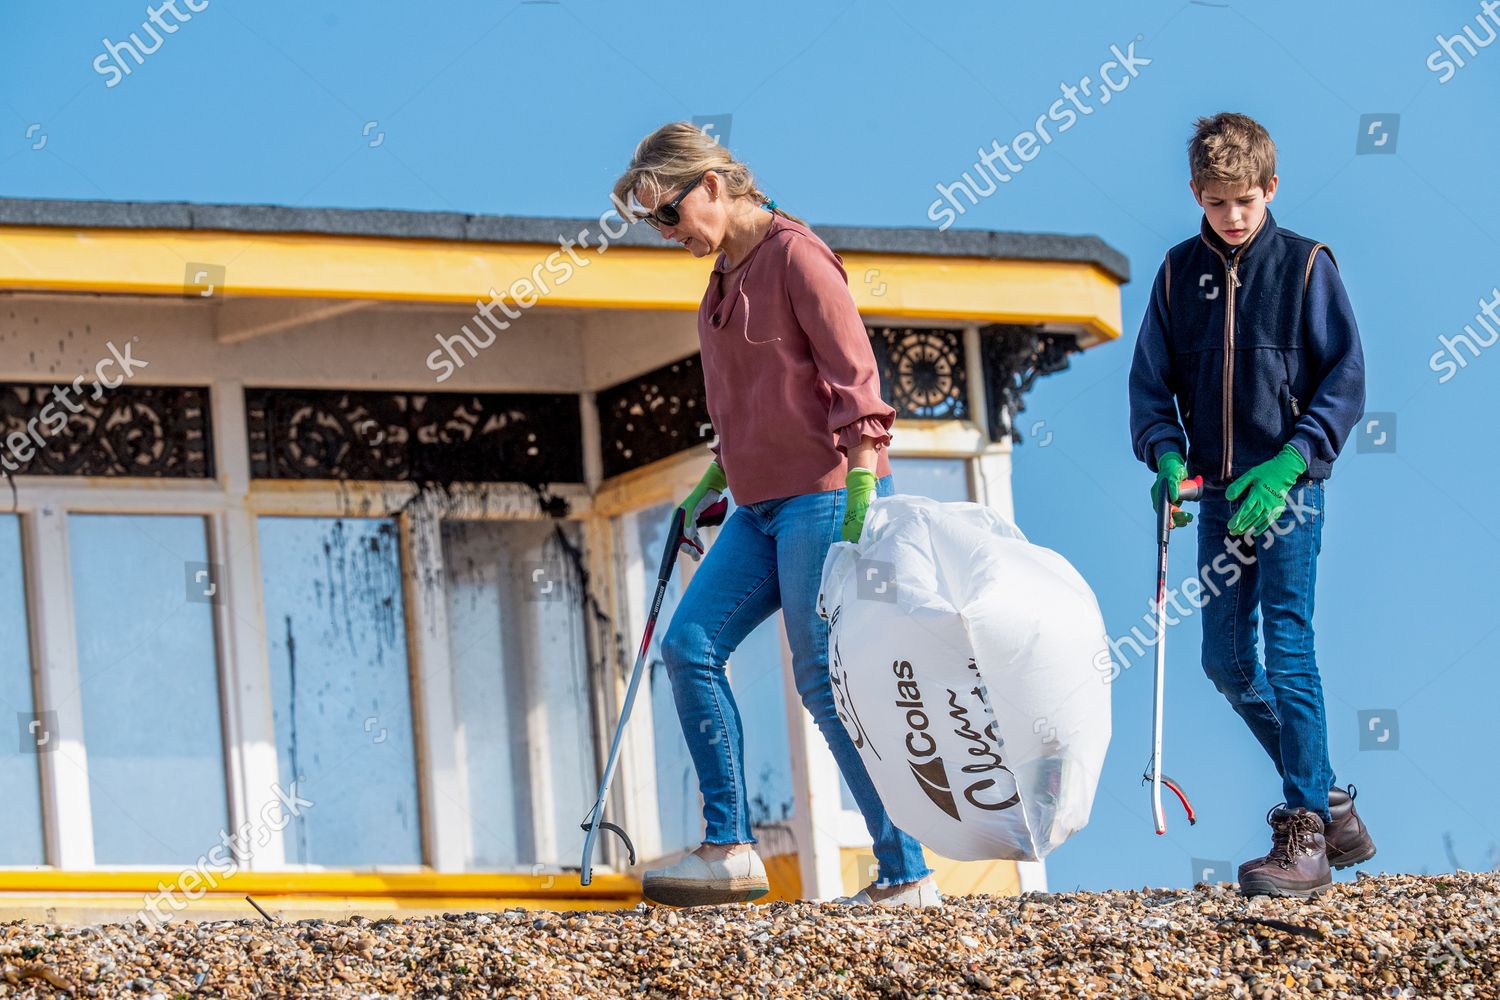 prince-edward-and-sophie-countess-of-wessex-great-british-beach-clean-southsea-beach-portsmouth-uk-shutterstock-editorial-10782998co.jpg